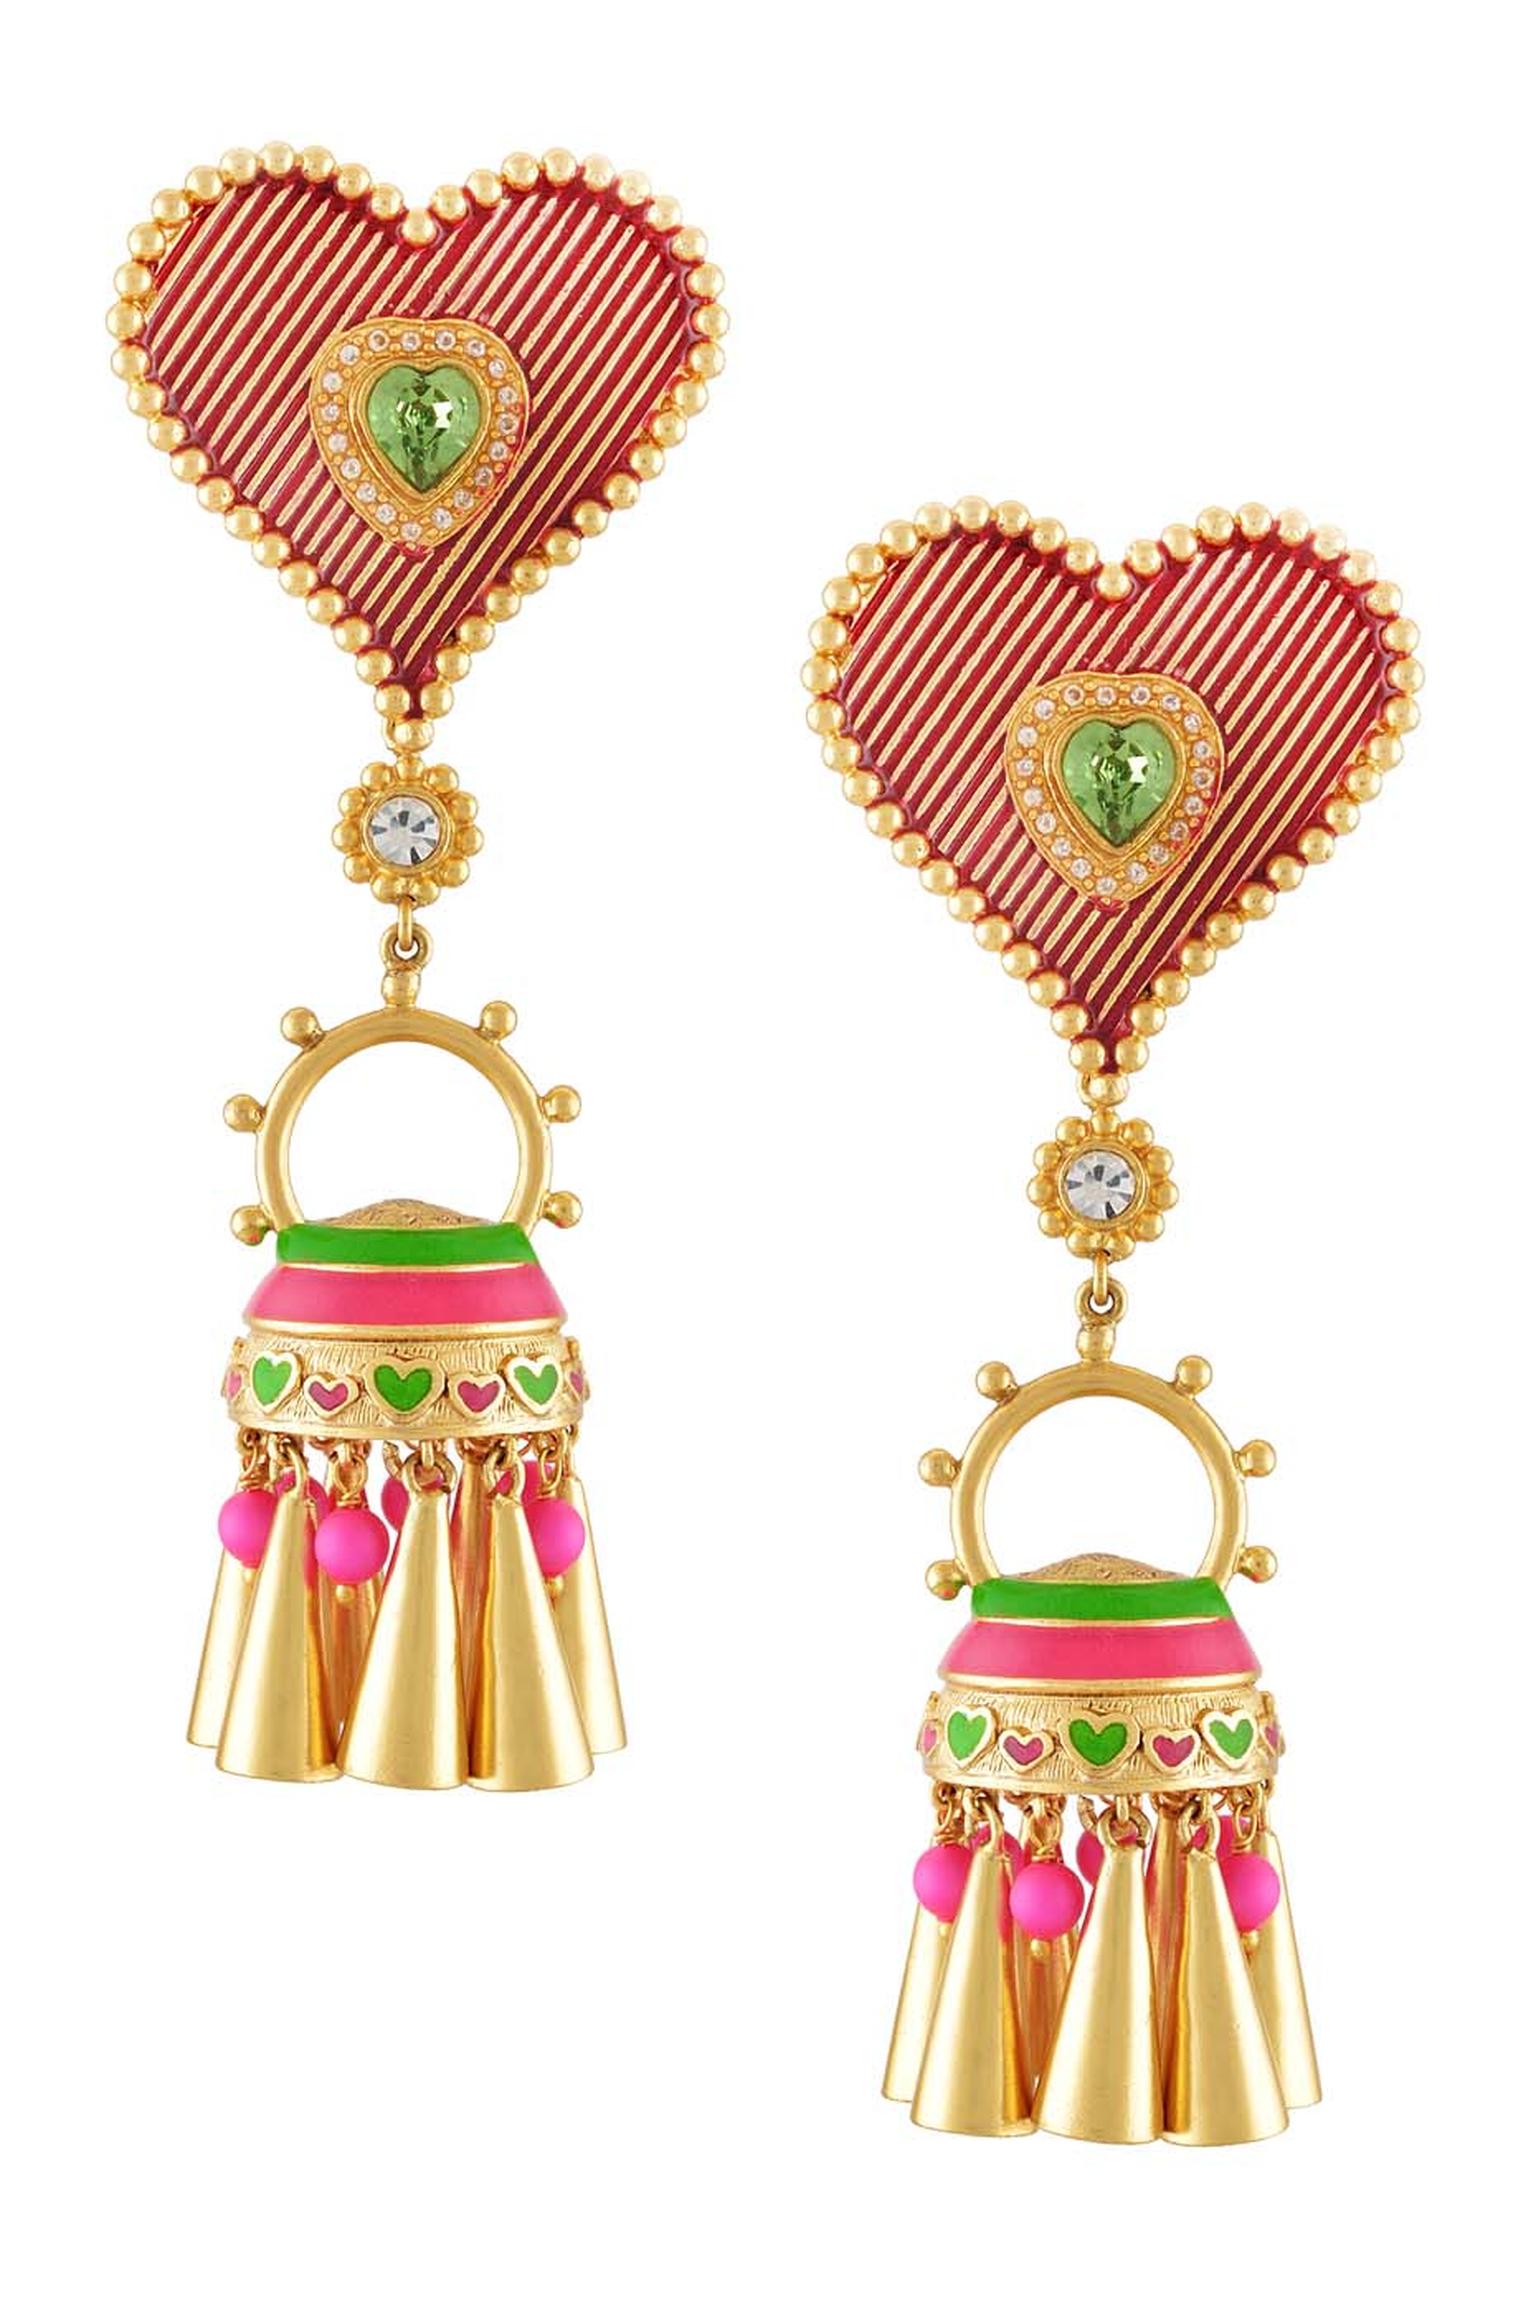 Amrapali and Manish Arora Ella earrings with striped hearts and colourful tassels.